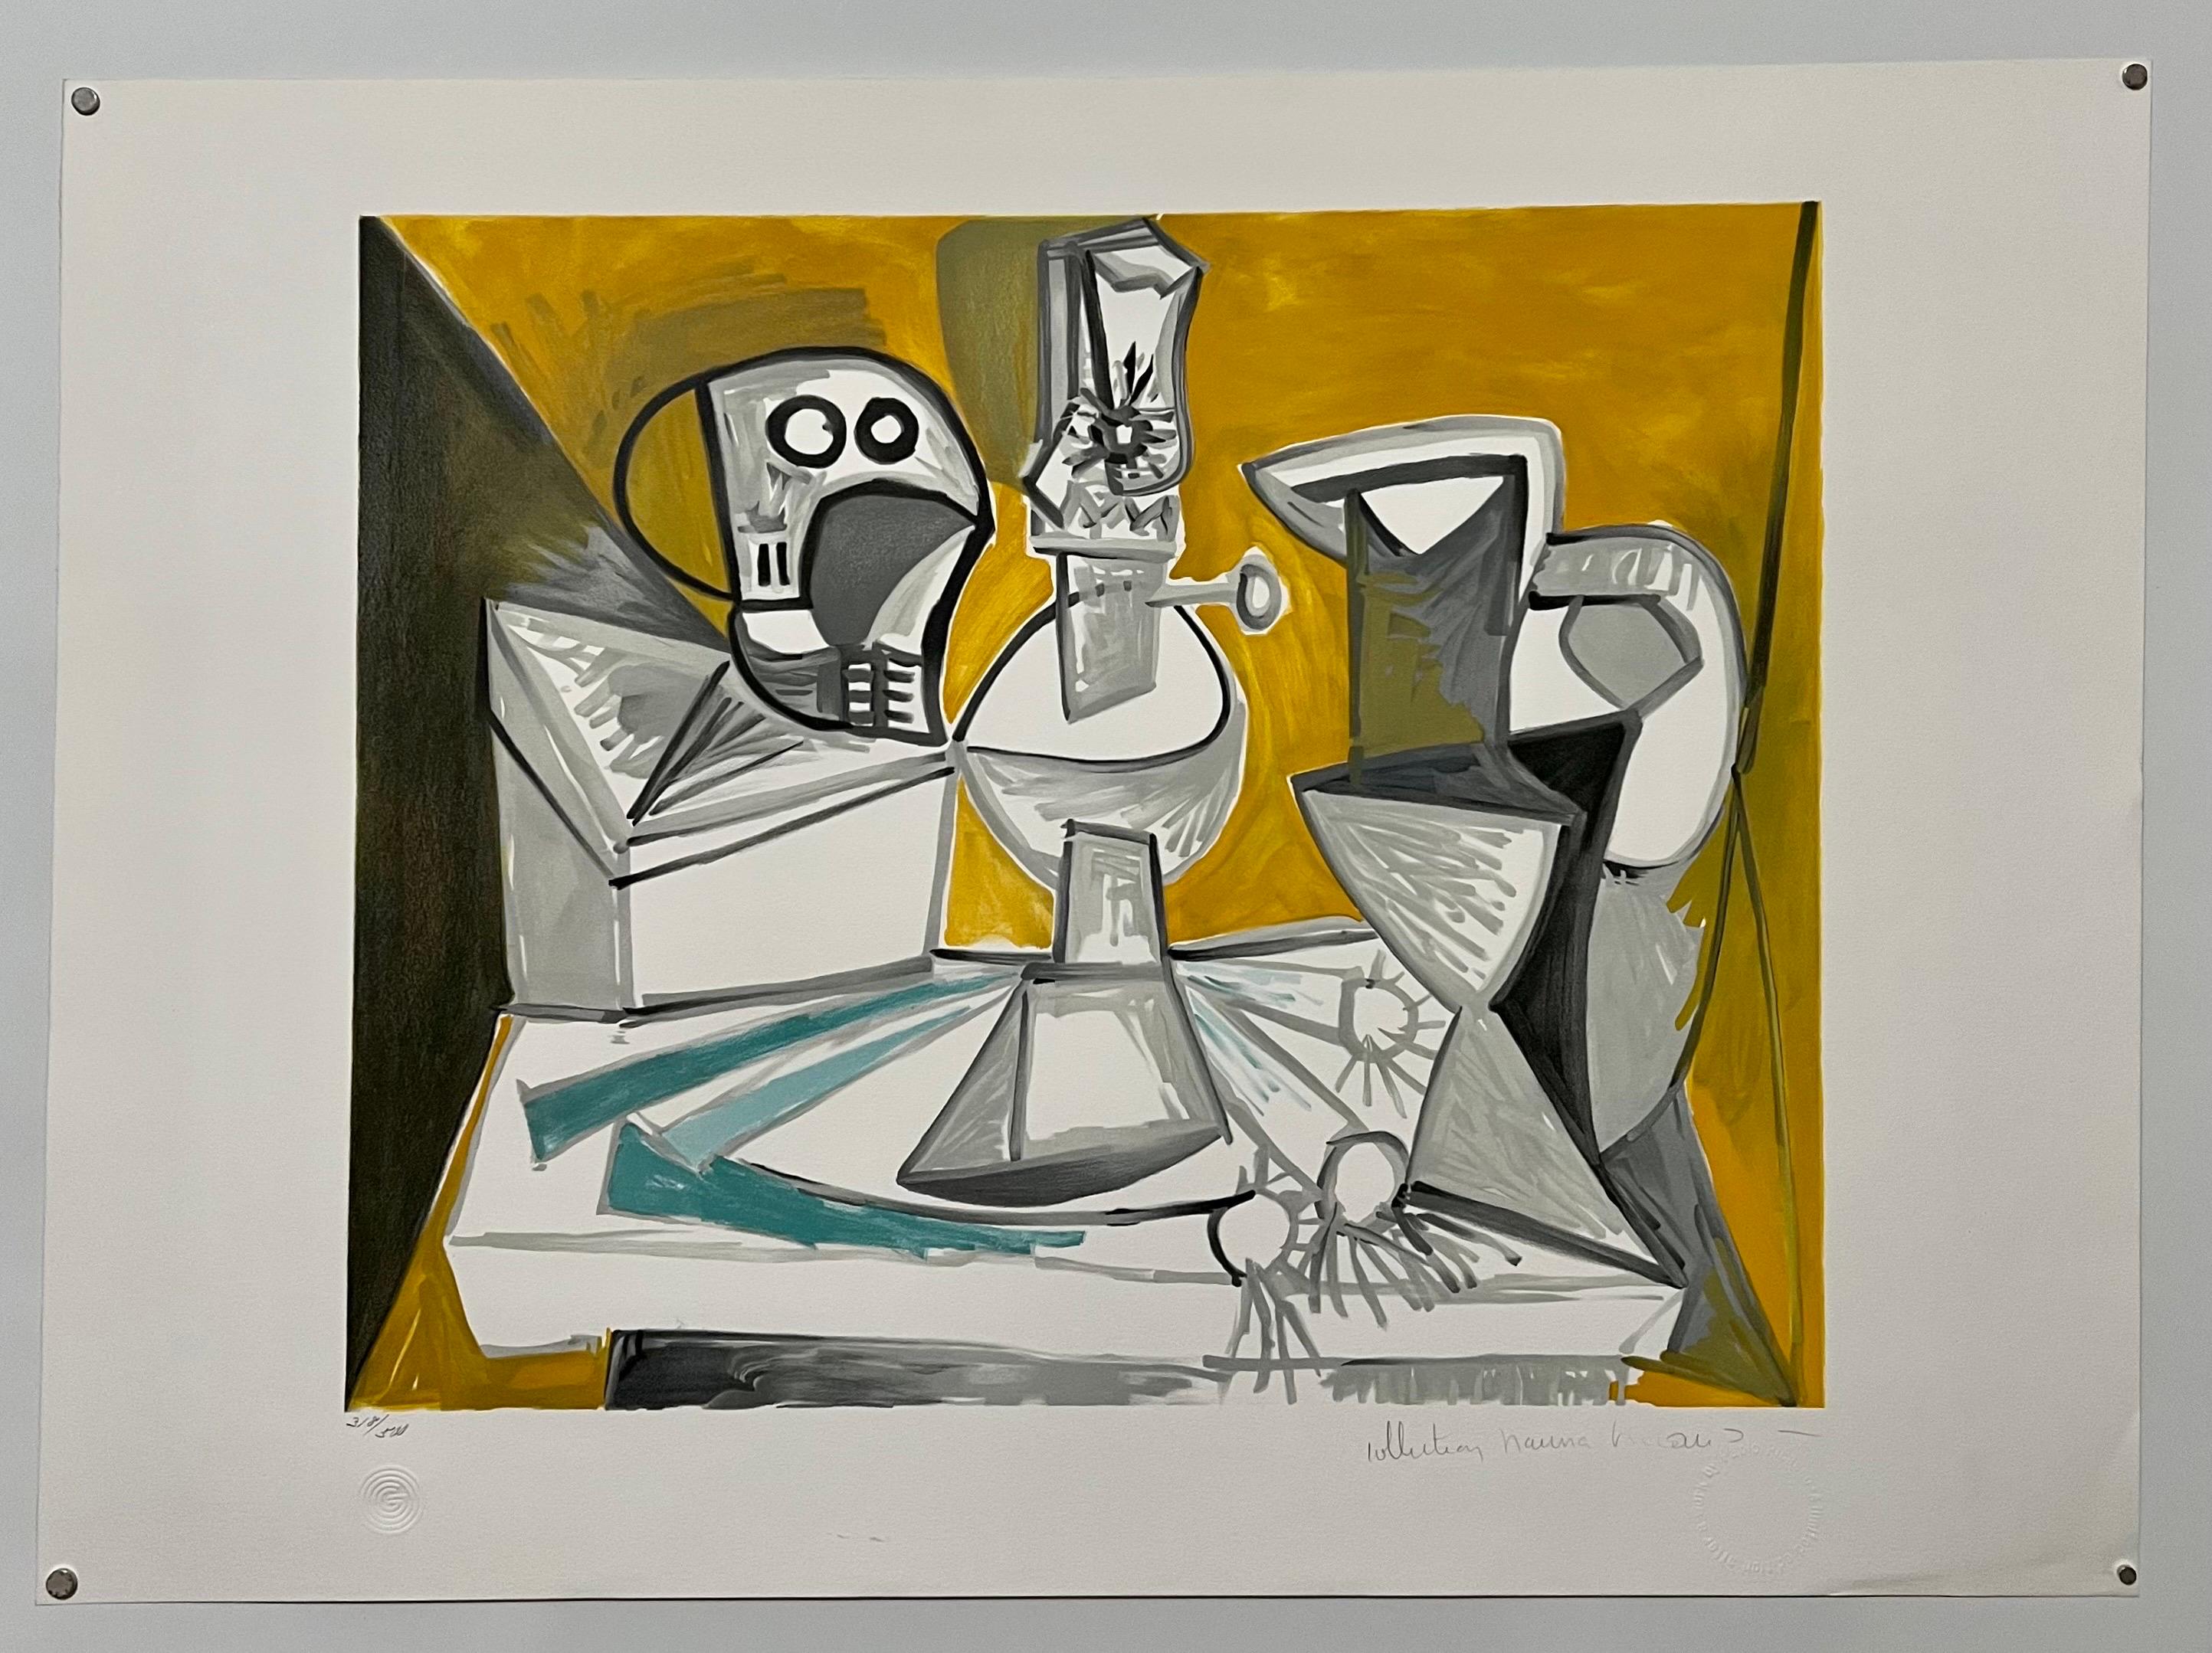 Pablo Picasso Estate Hand Signed Lithograph Abstract Cubist Composition  - Print by (after) Pablo Picasso